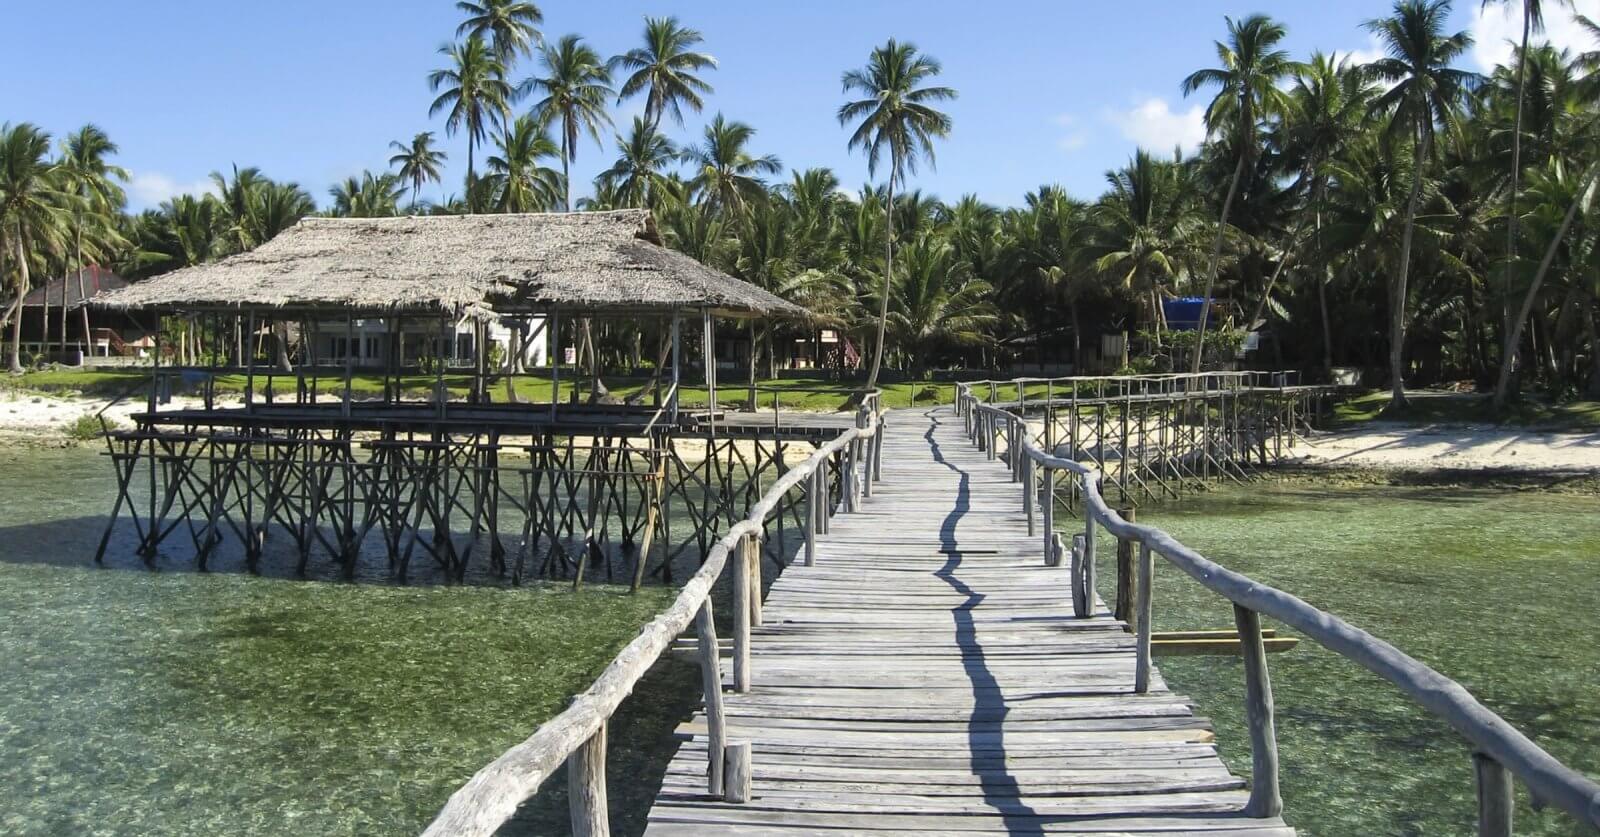 Visit a wooden walkway leading to a thatched-roof structure on stilts amidst tropical palm trees at Siargao Resorts.